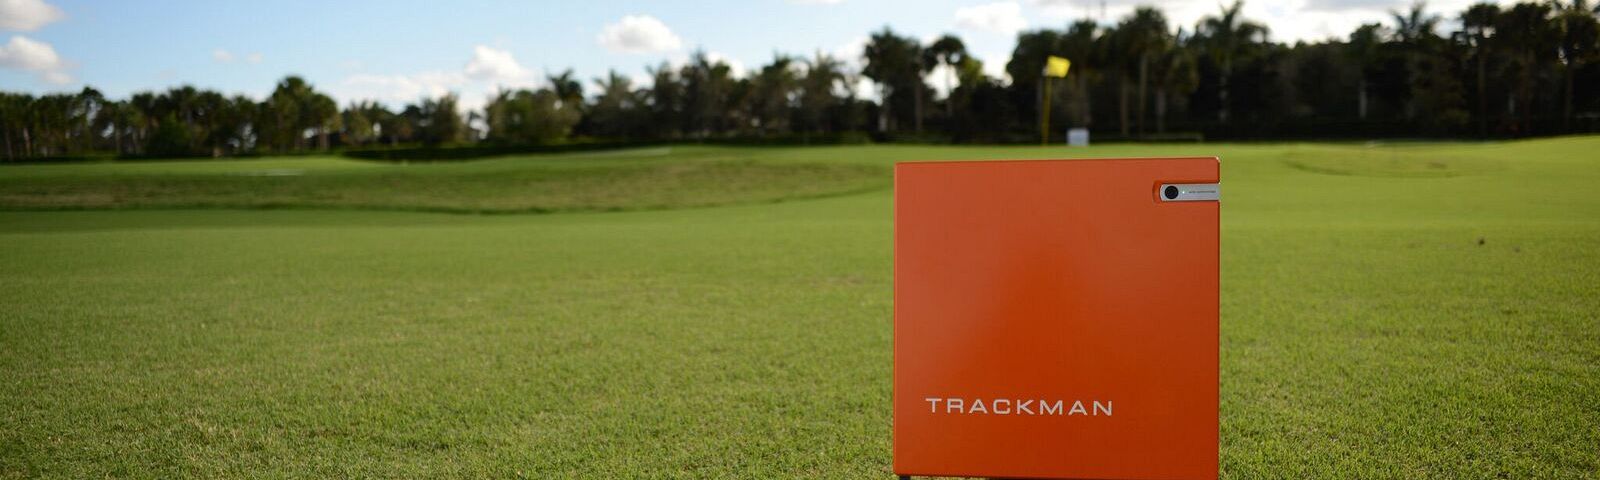 How to train like the pros with advanced TrackMan 4 golf technology